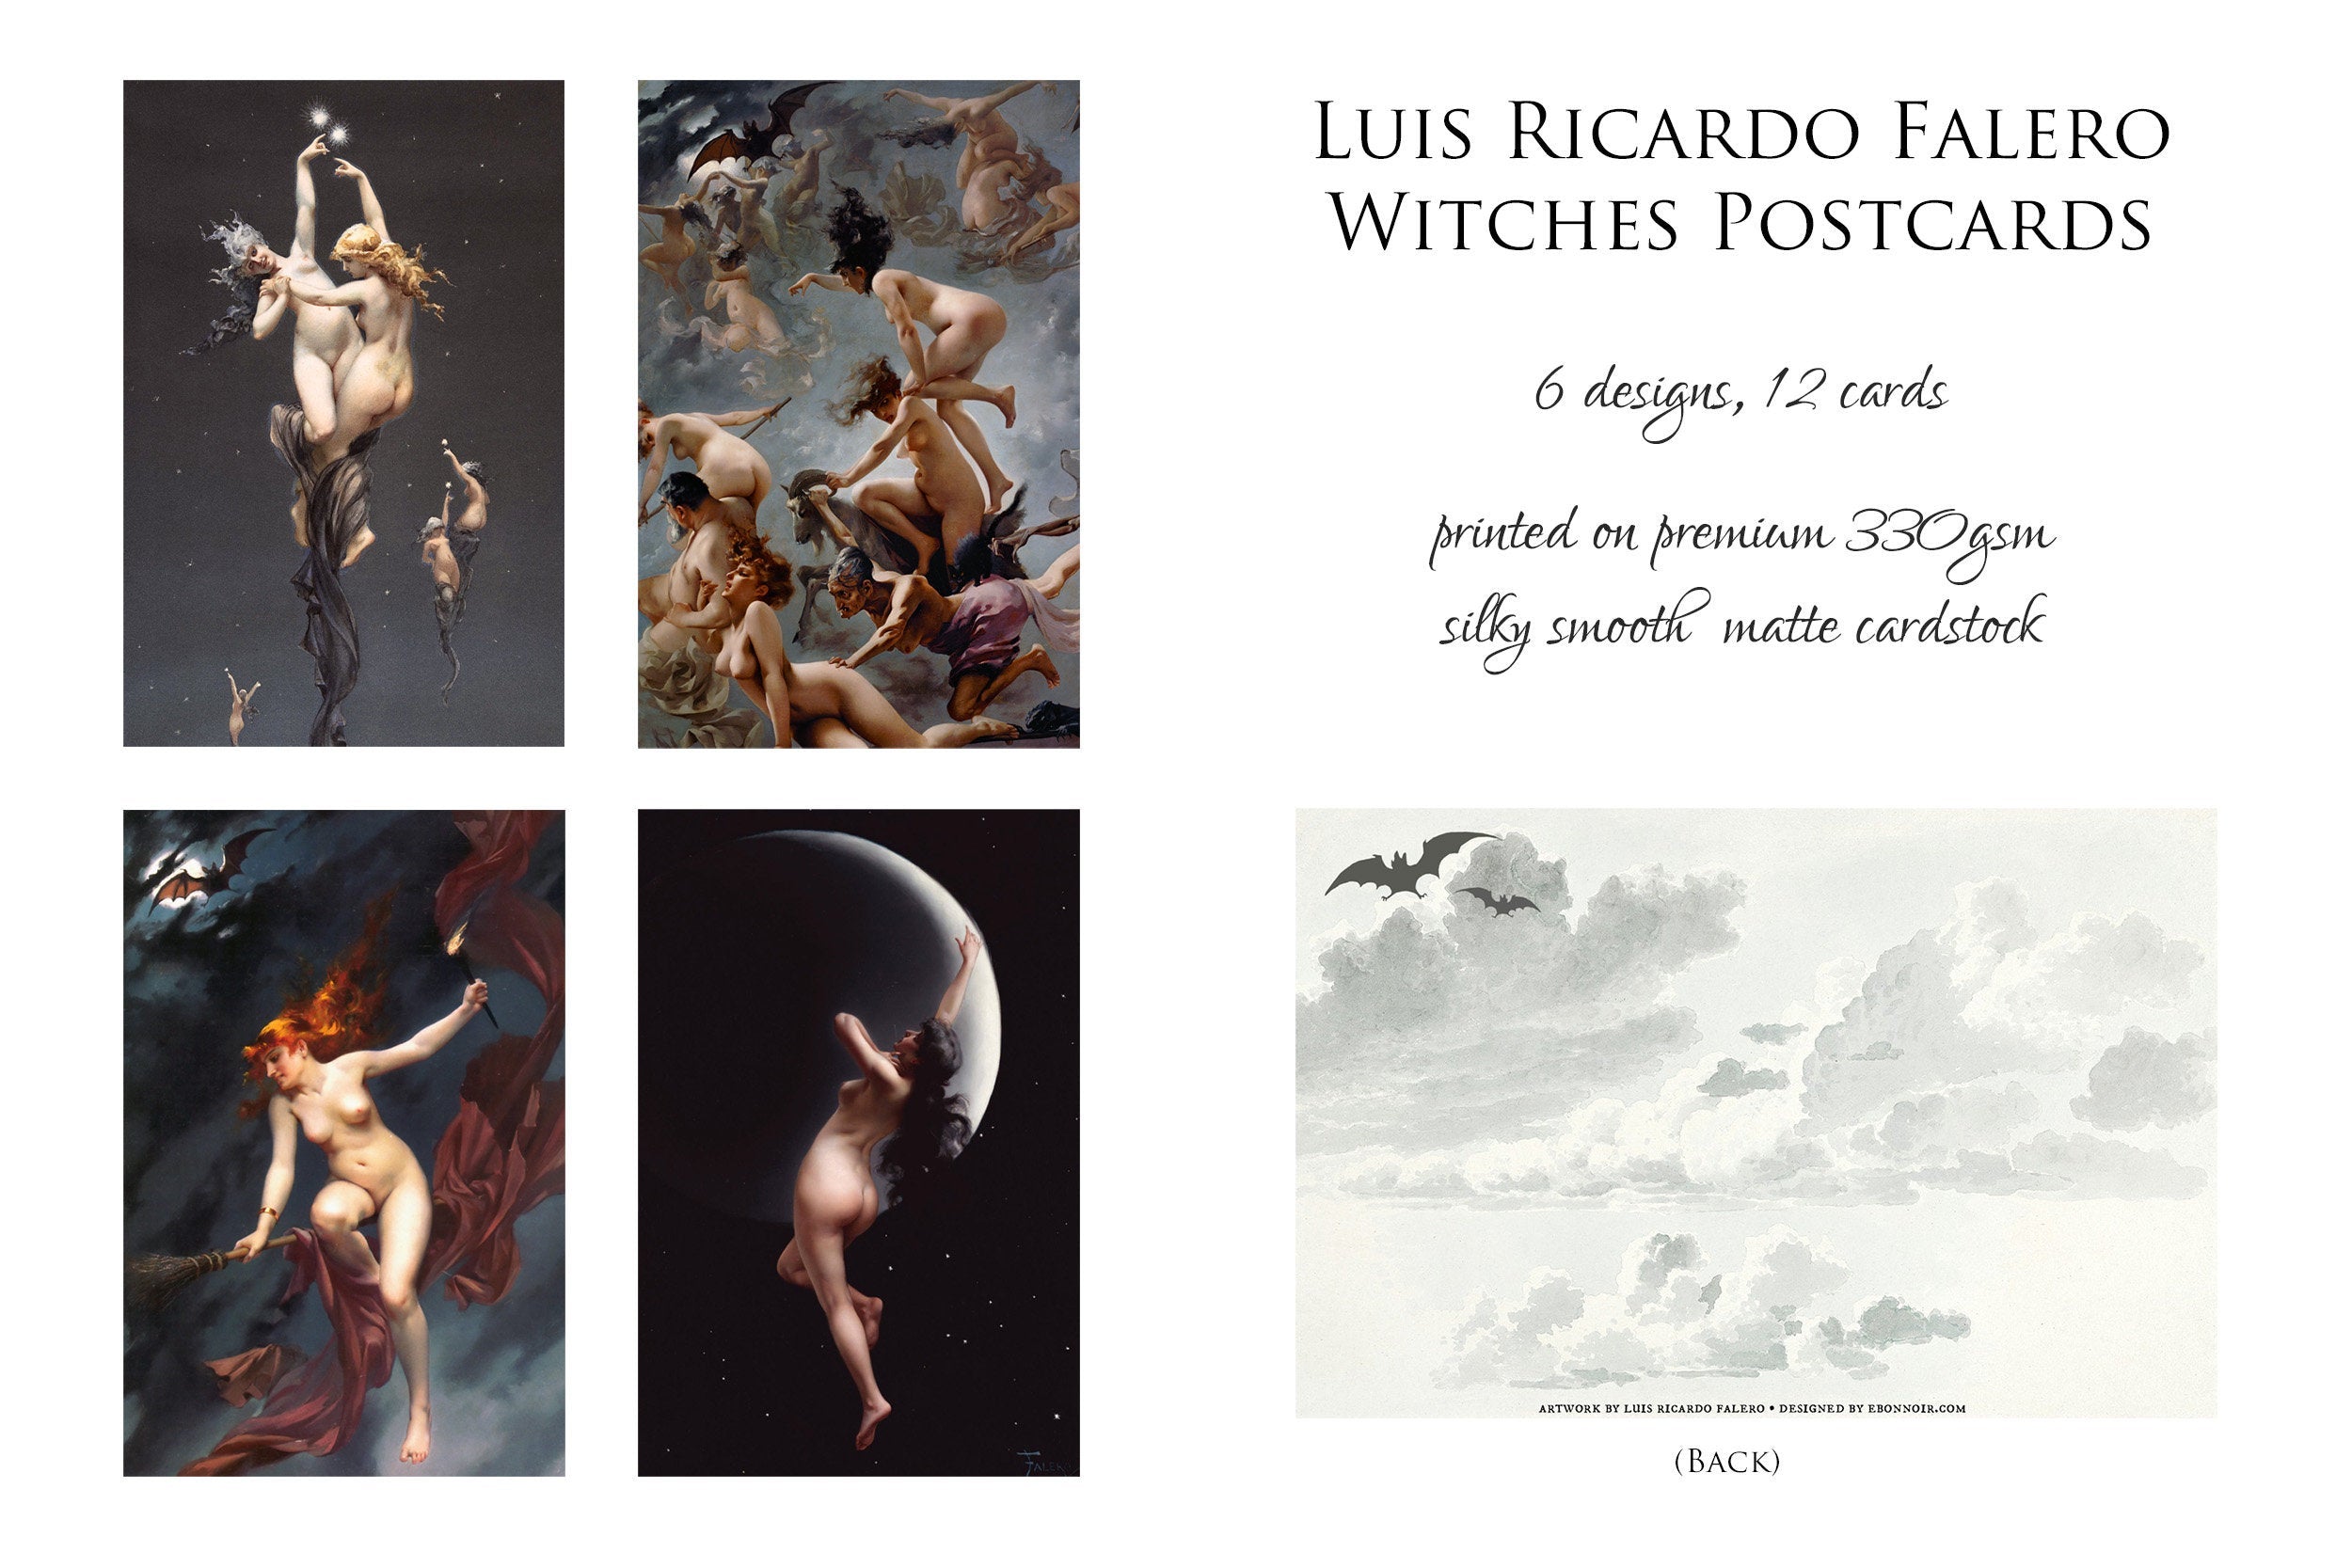 Witches by Luis Ricardo Falero, Postcard/Greeting Card Set, Exclusively Designed, 4 Designs, 12 Cards